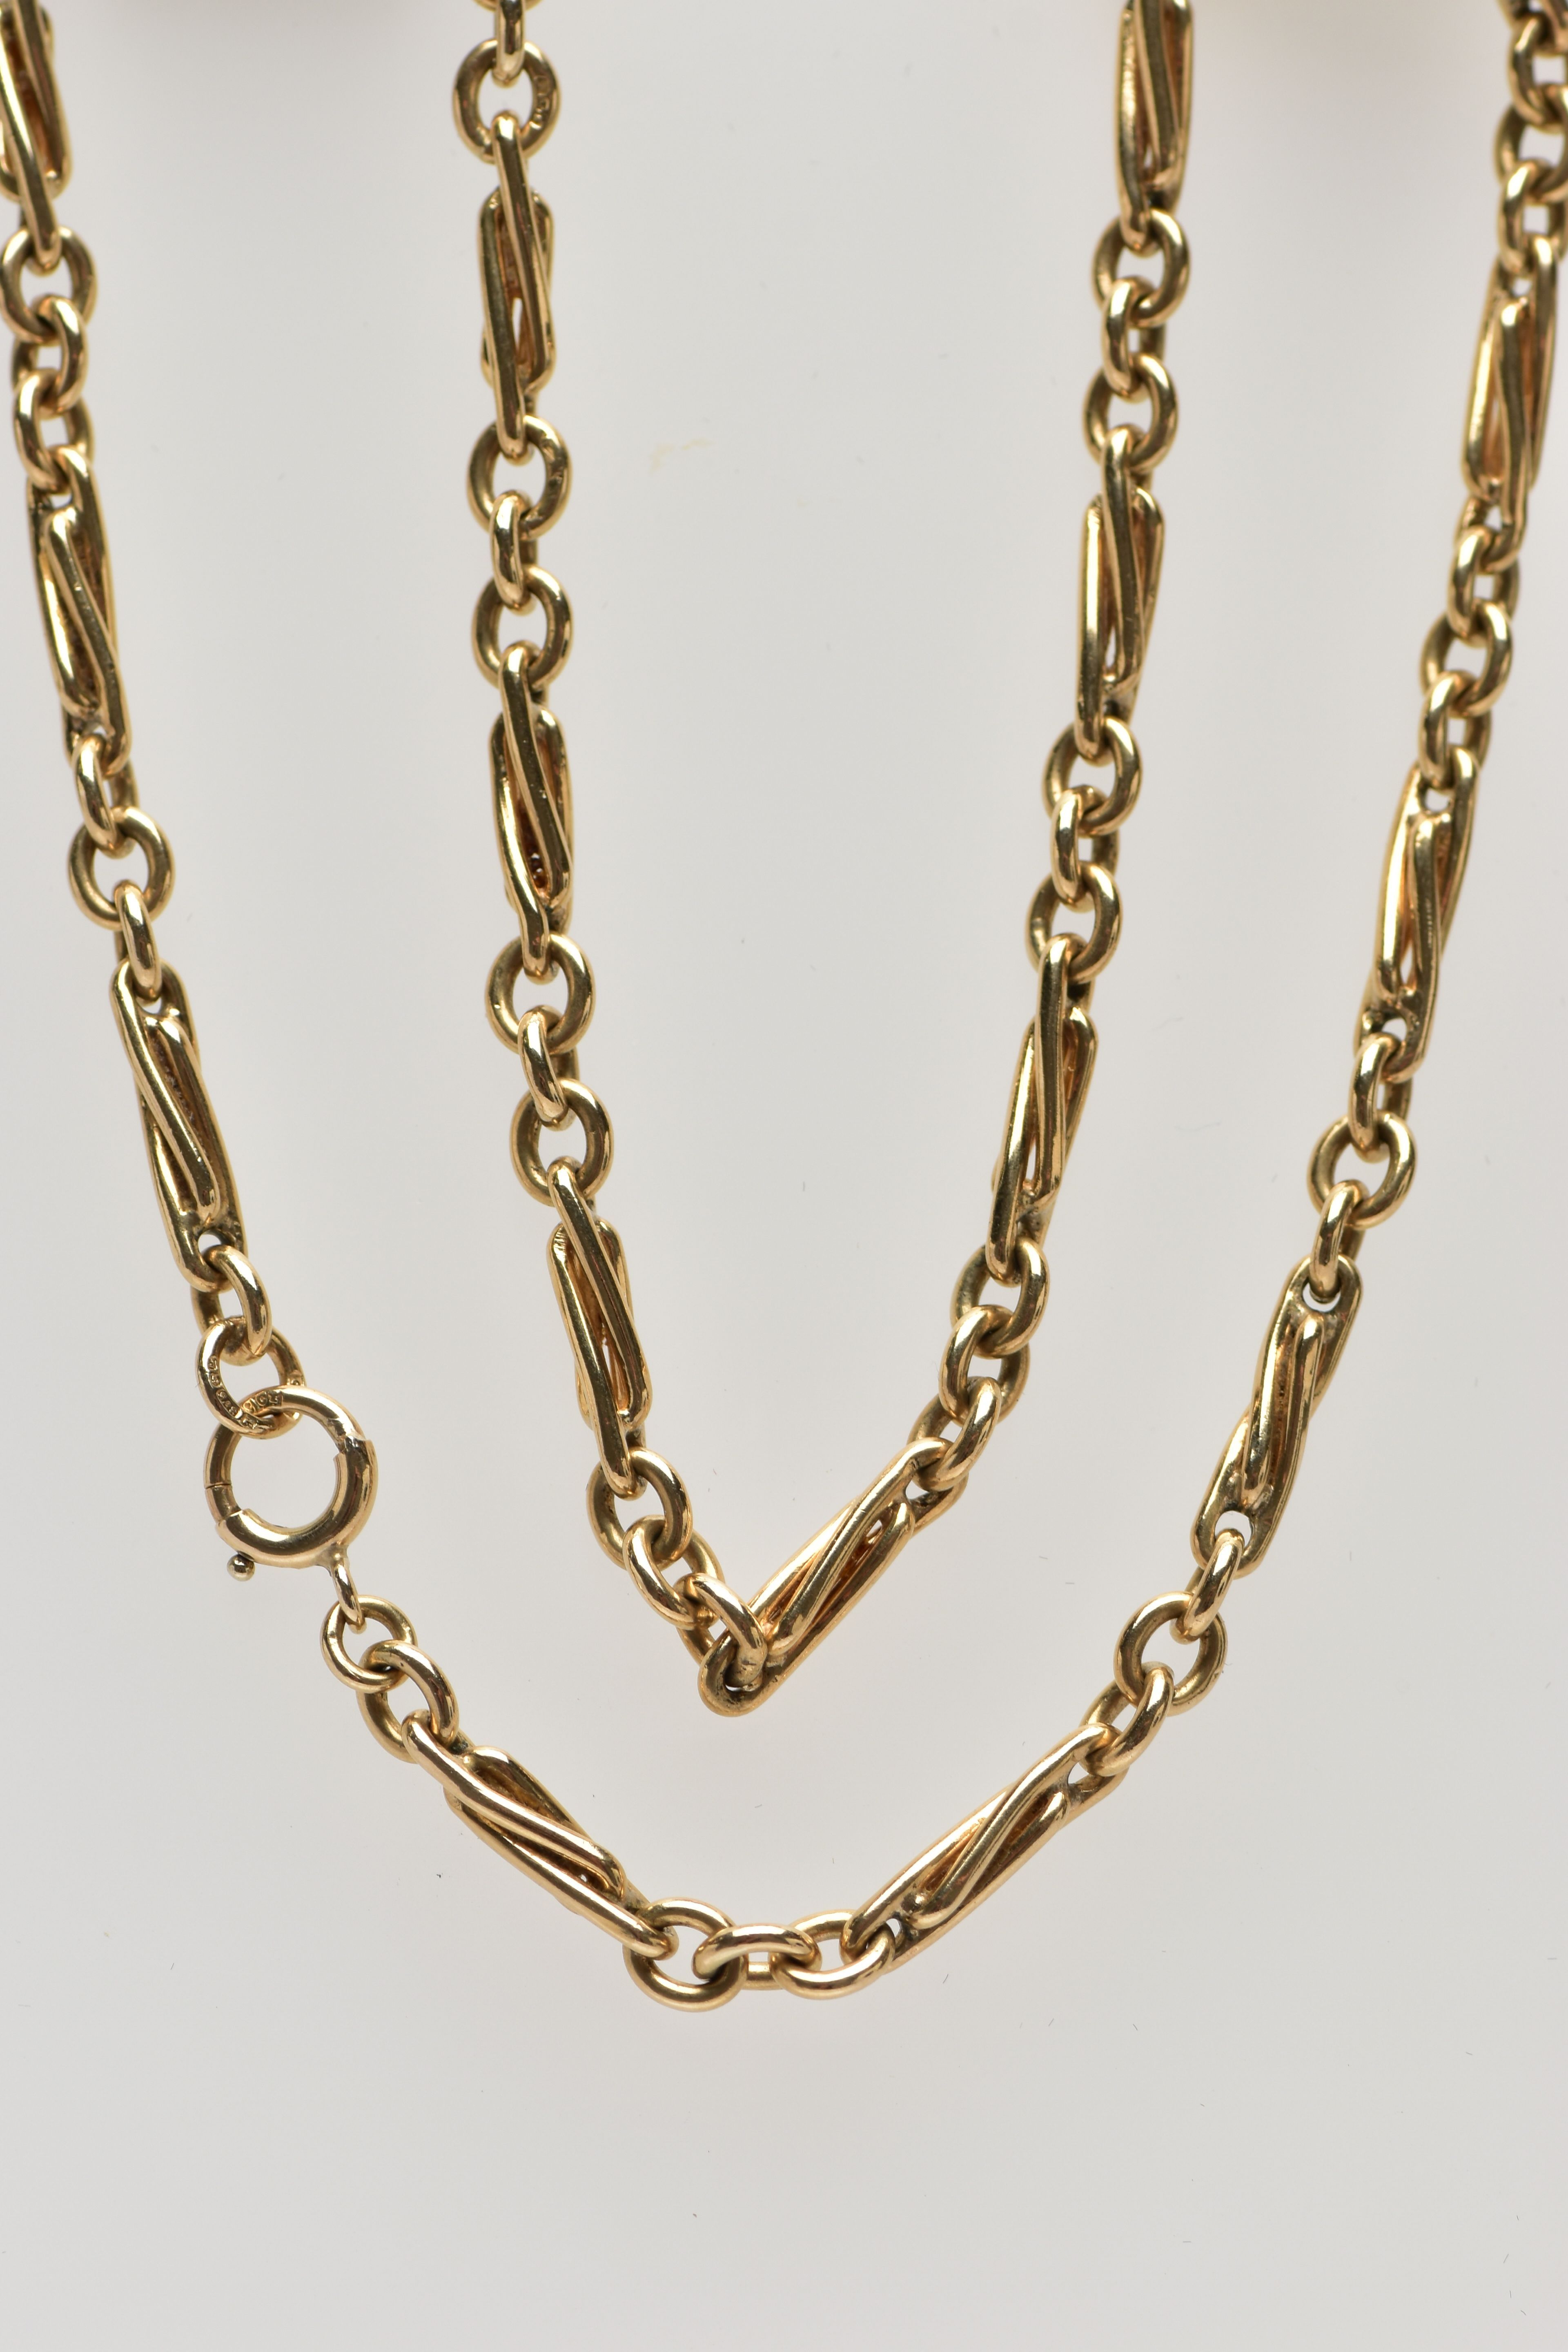 A 9CT YELLOW GOLD FETTER CHIAN NECKLACE, designed with a series of twisted elongated links